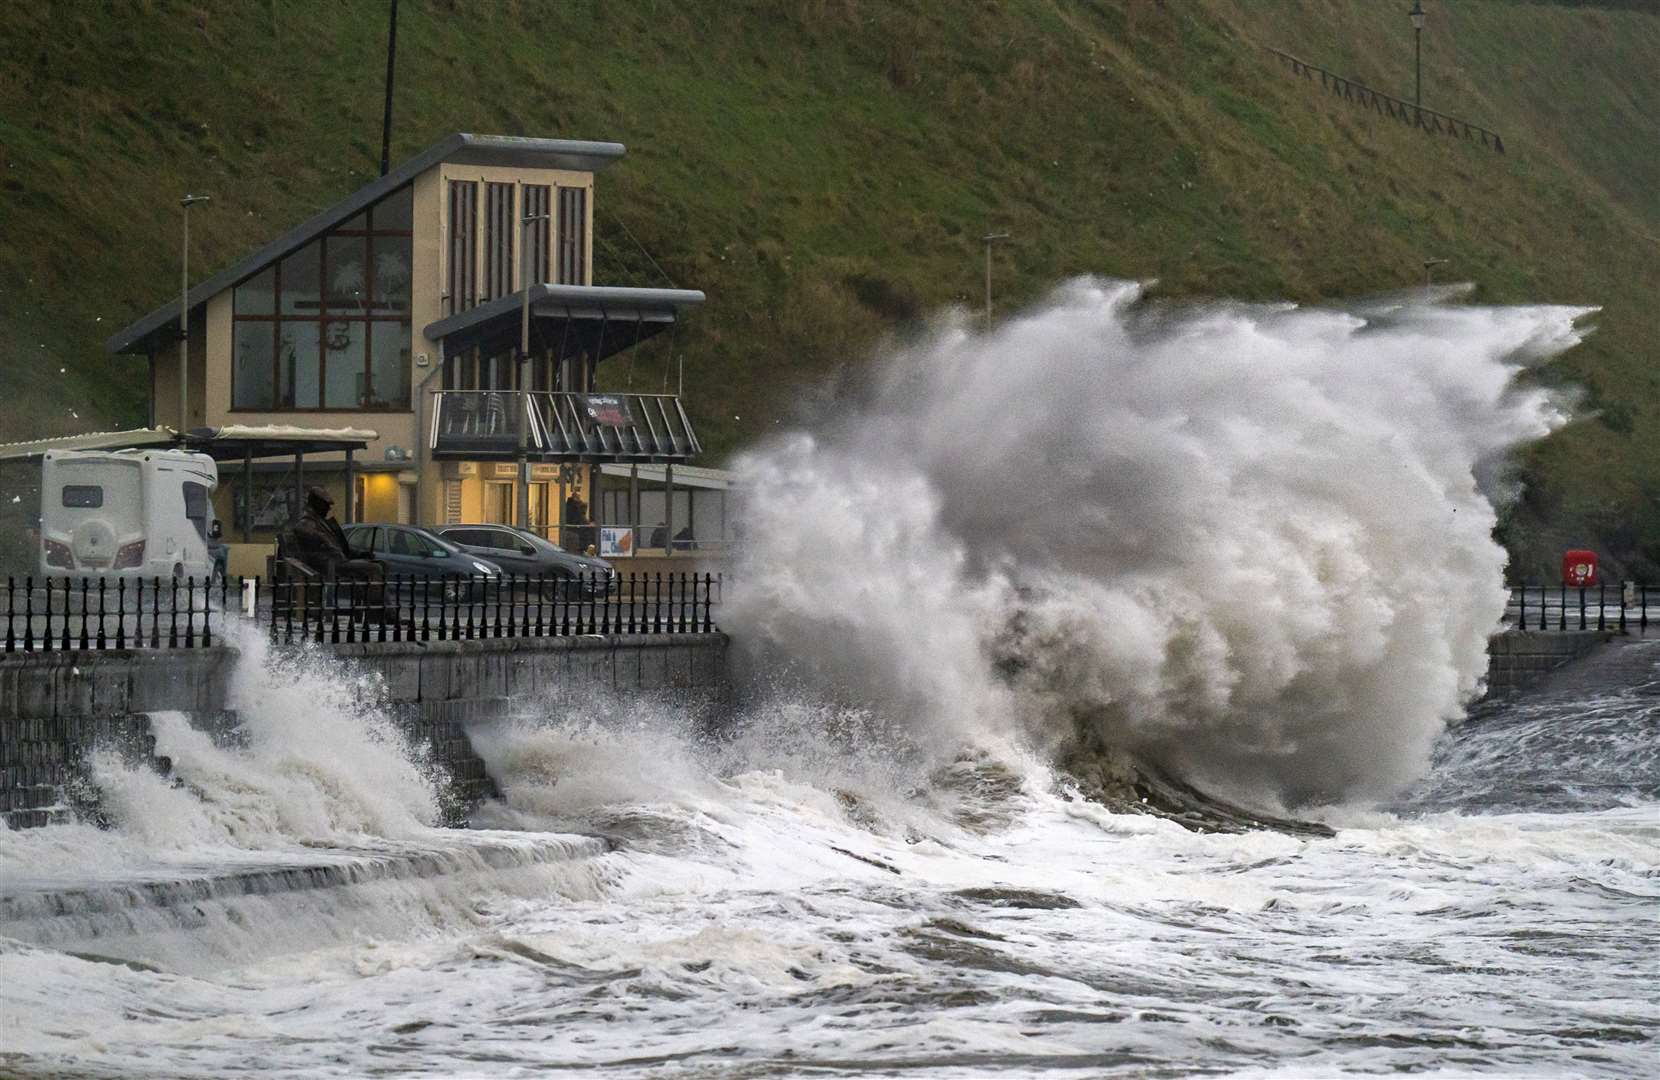 Waves crash over the promenade in Scarborough during the storm (Danny Lawson/PA)